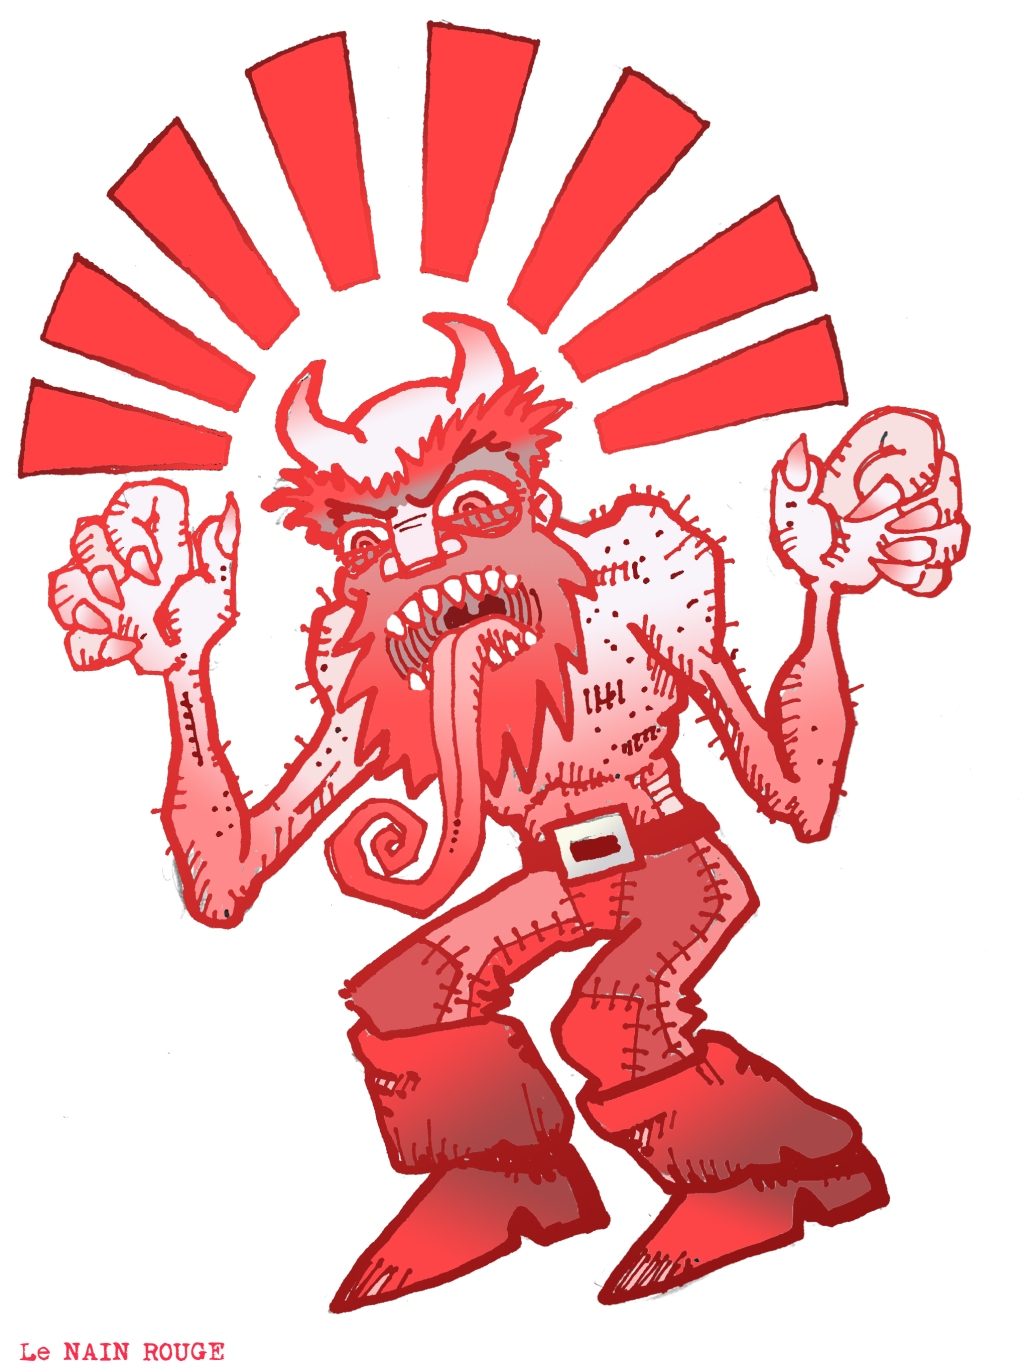 Marche du Nain Rouge Sunday March 24!